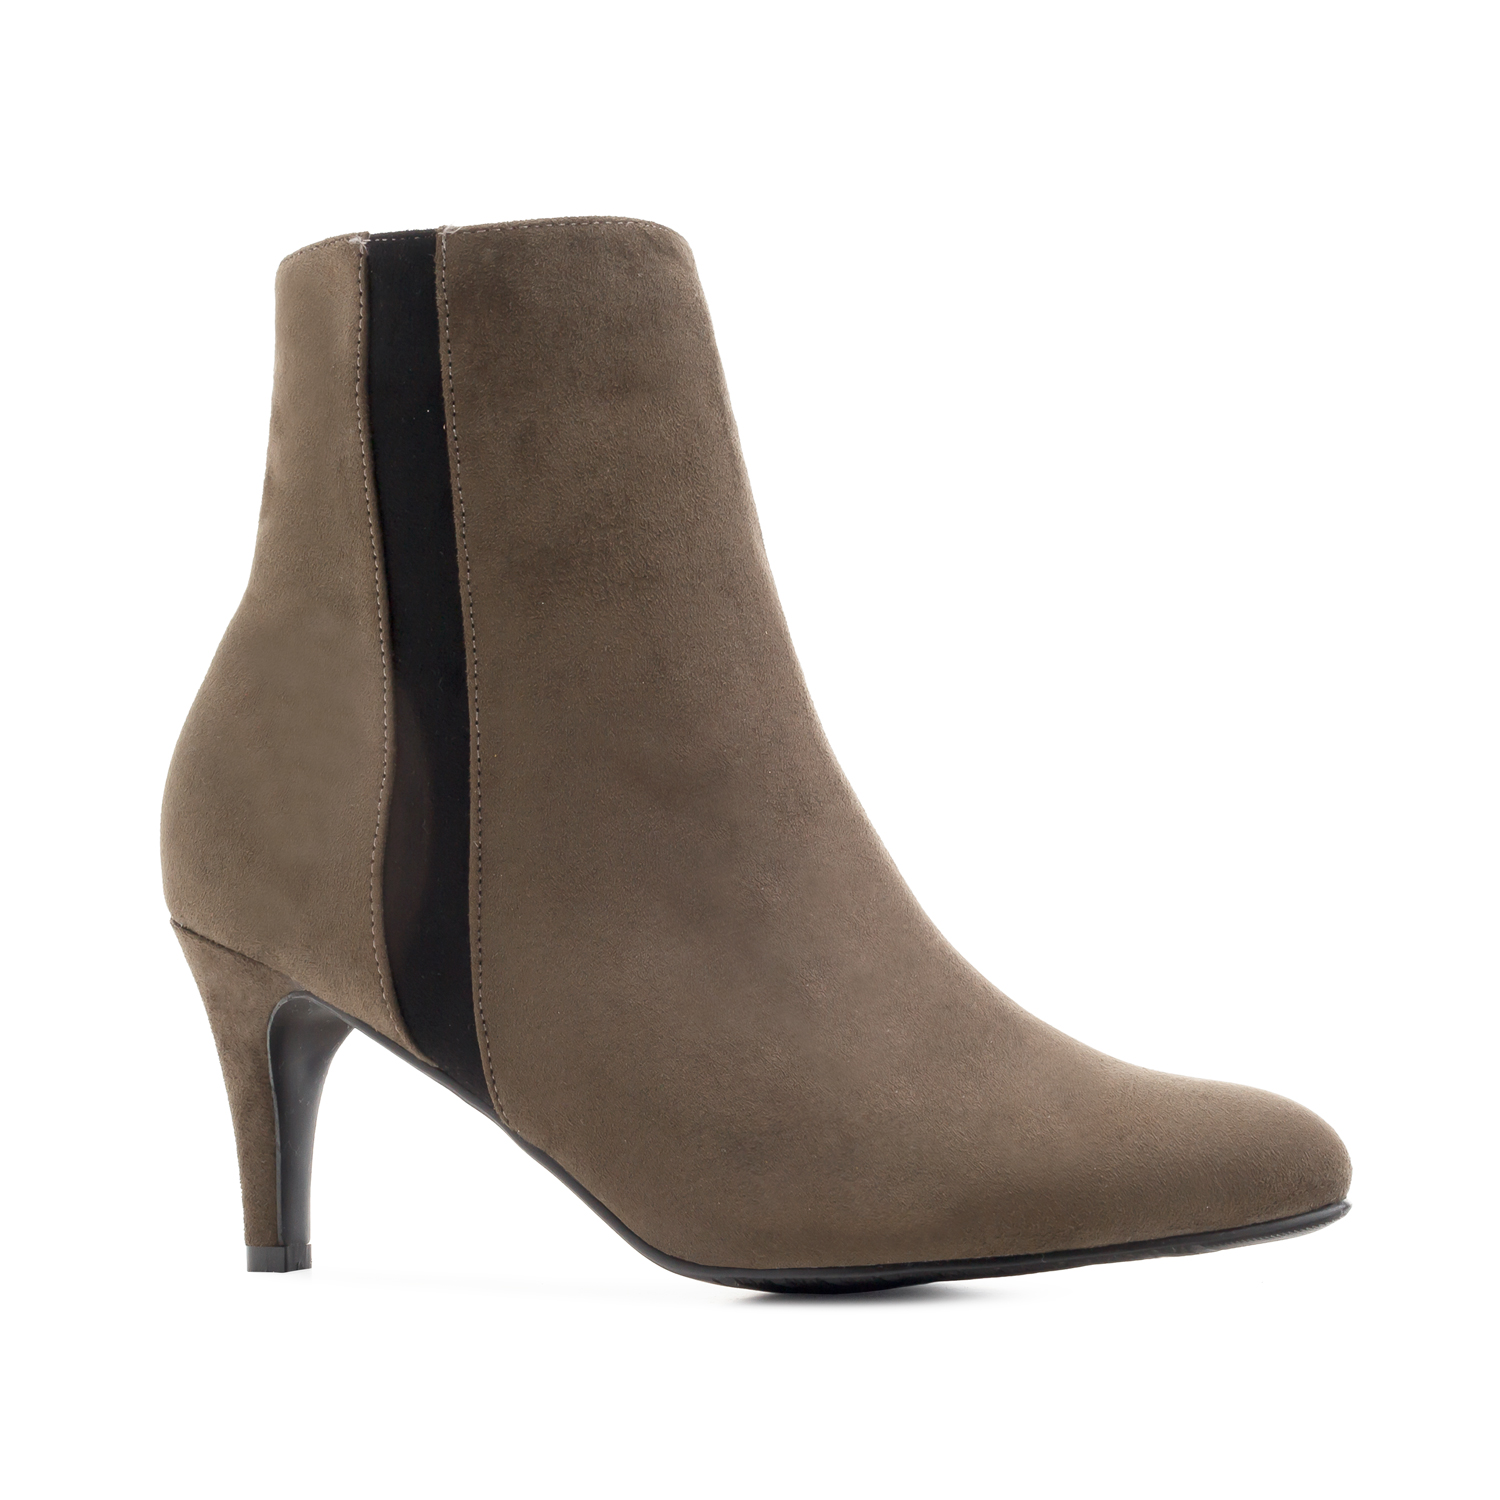 Stiletto Booties in Earth-coloured Suede 